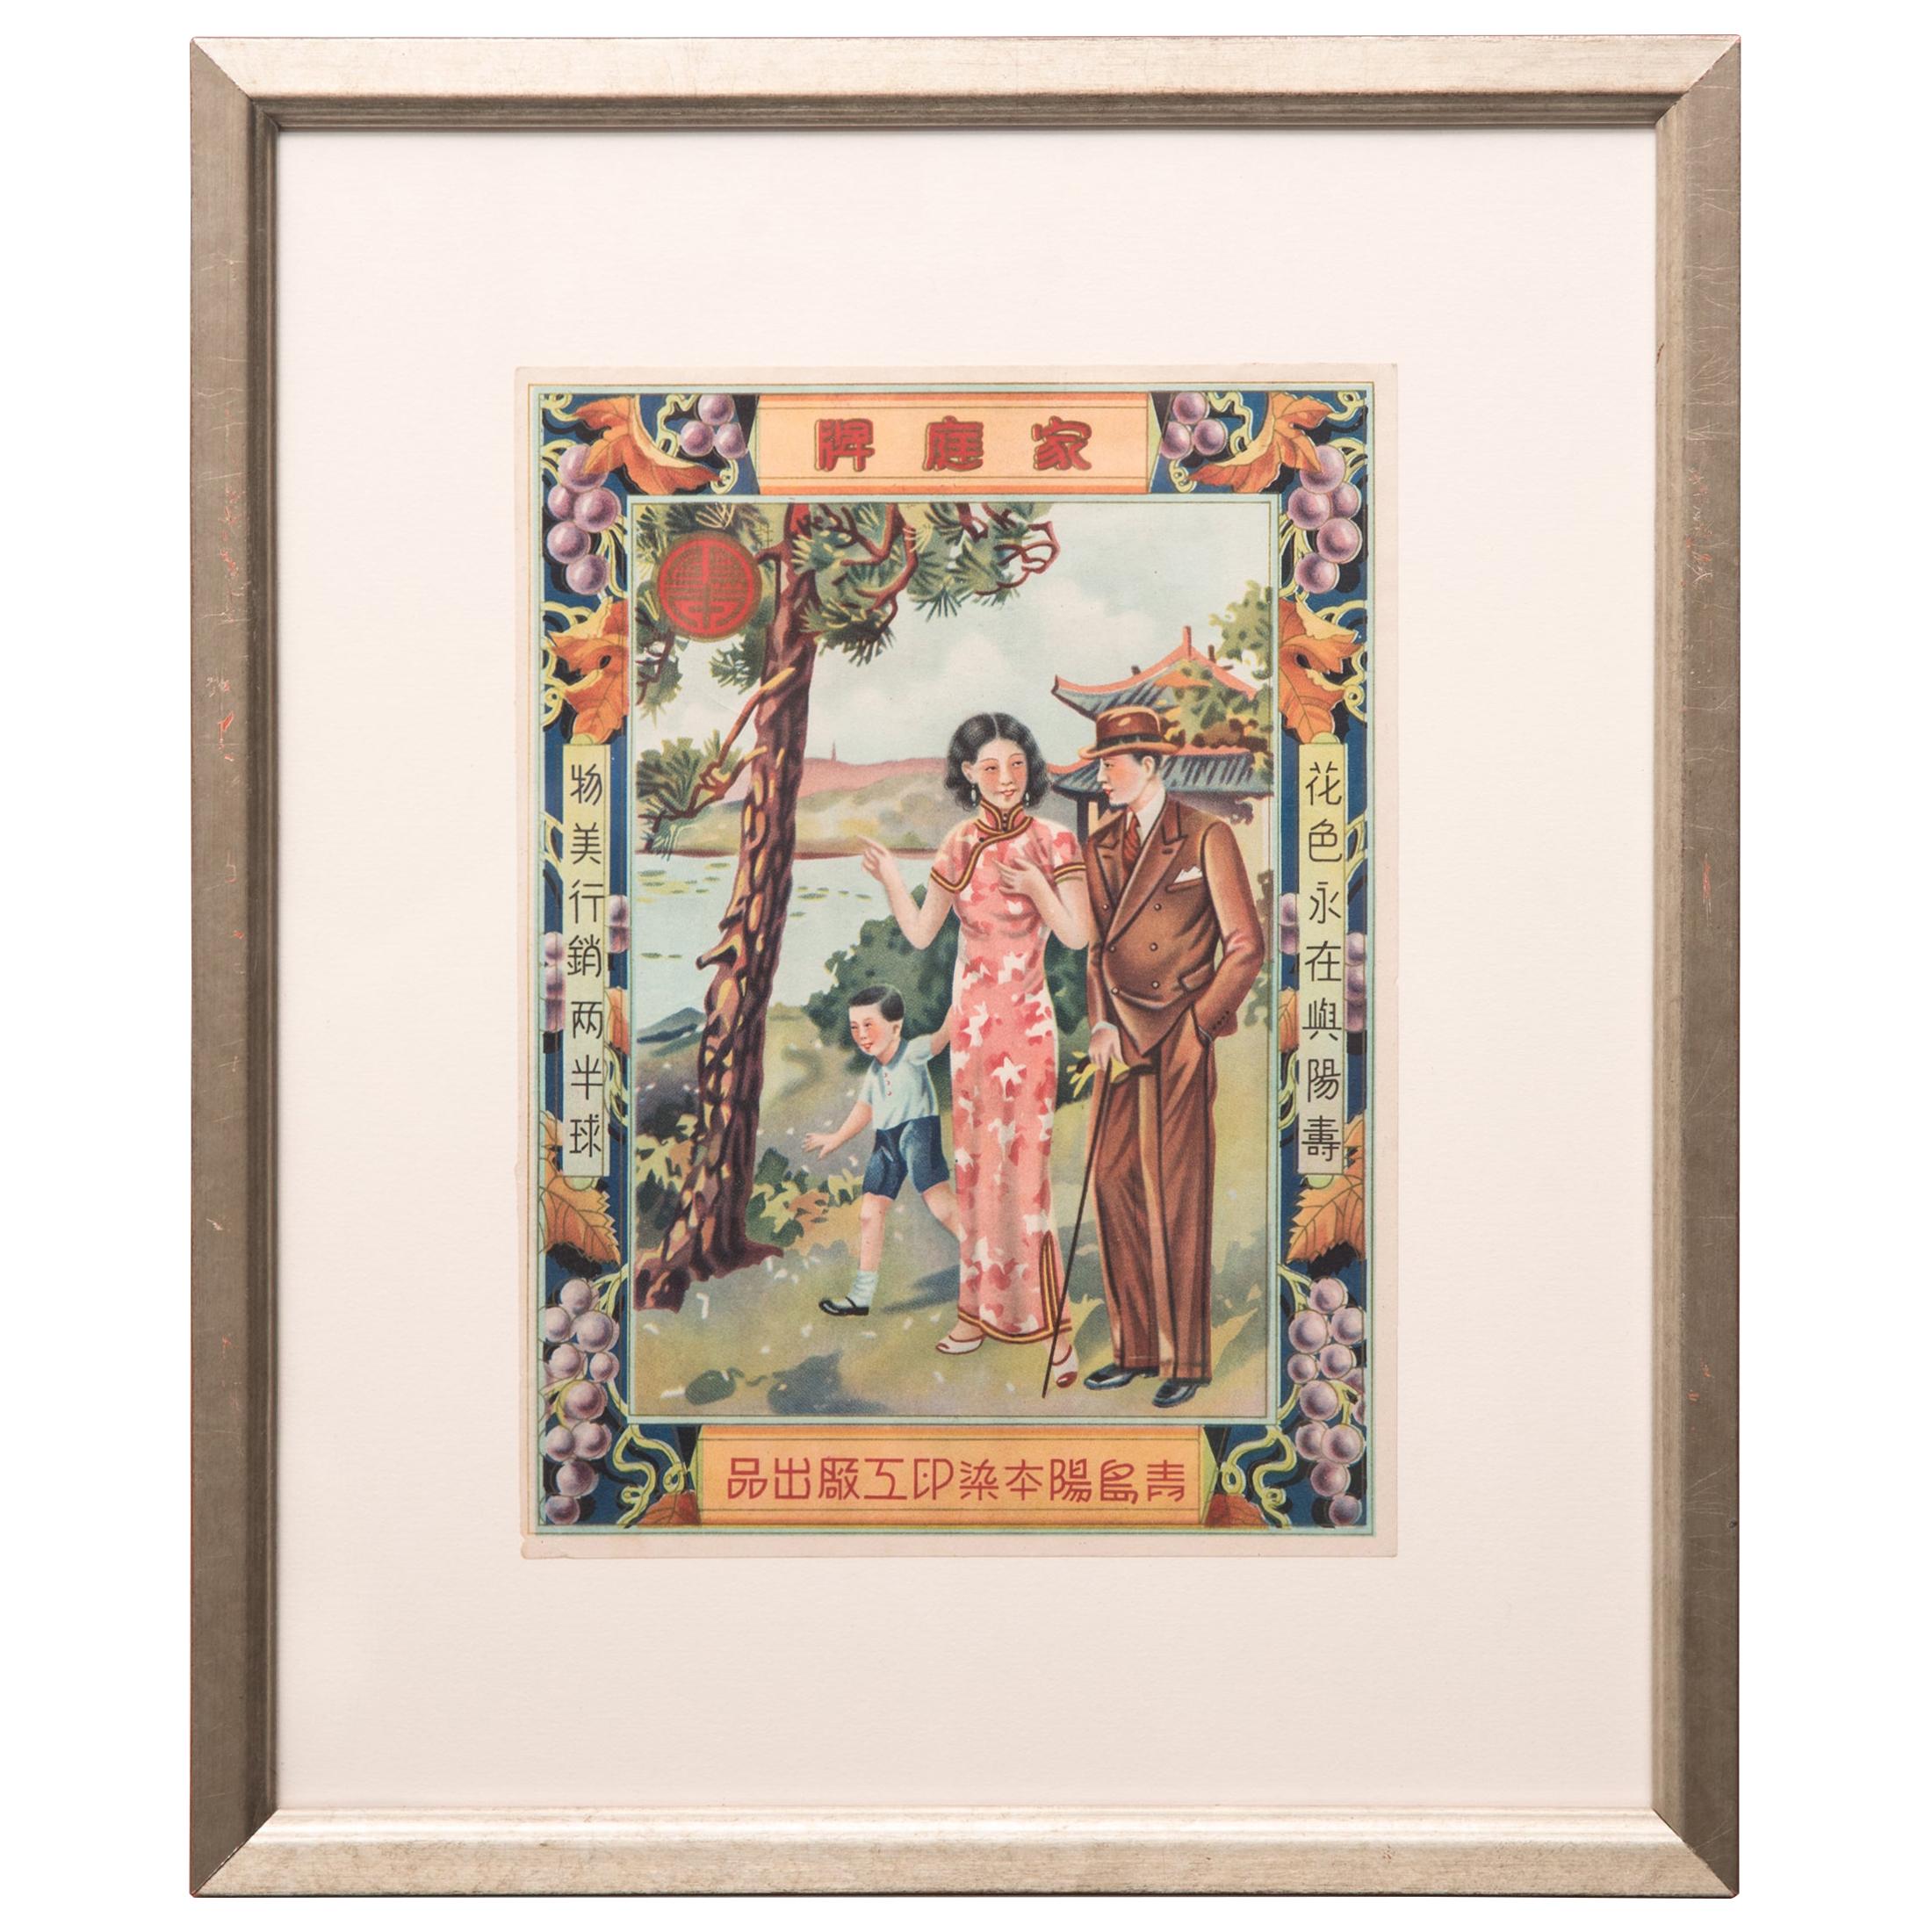 Framed Vintage Chinese East West Advertisement, circa 1920